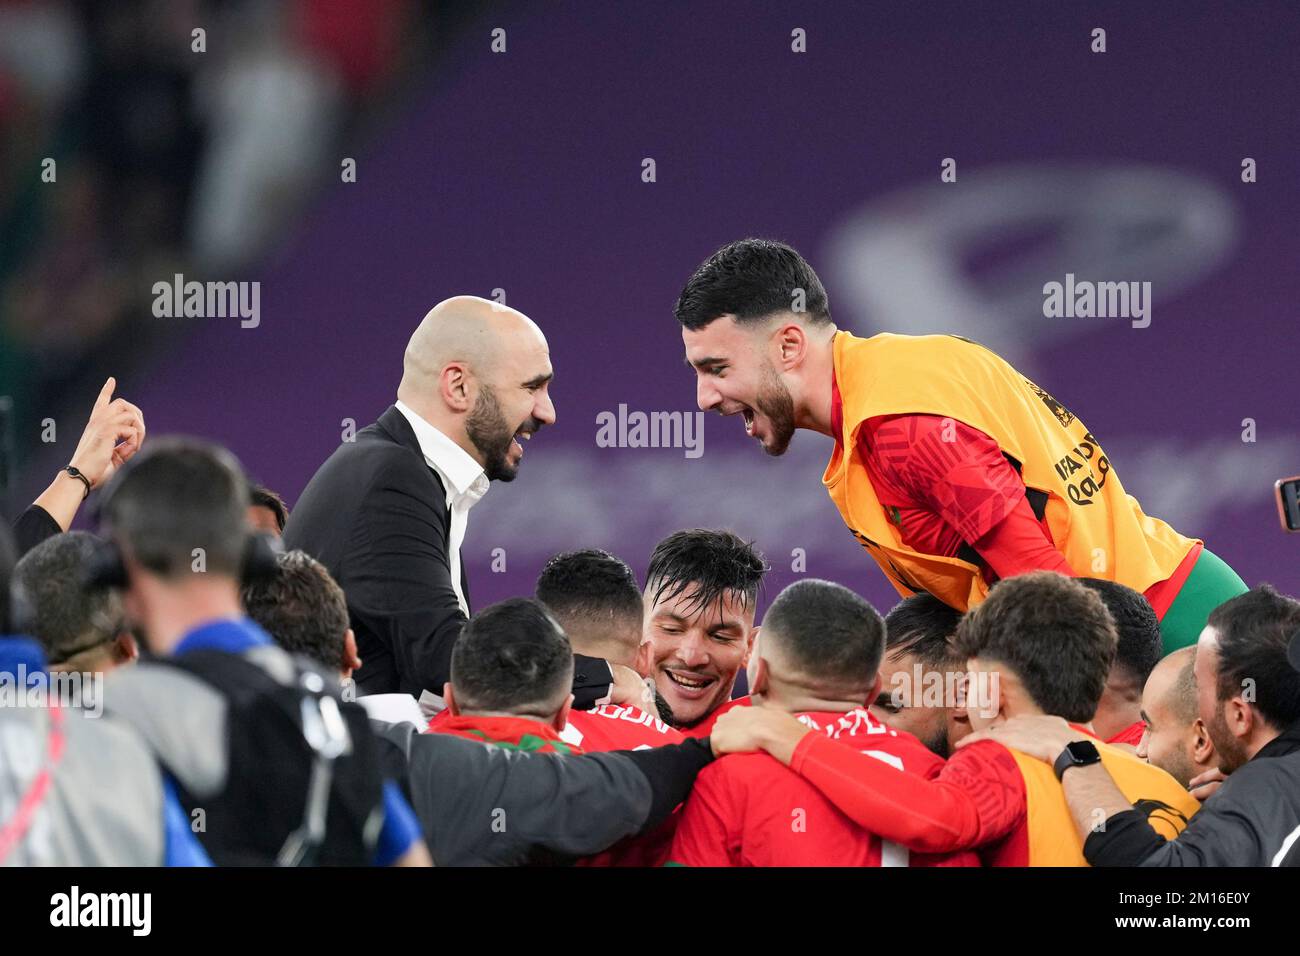 Doha, Qatar. 10th Dec, 2022. Morocco's head coach Walid Regragui (top L) celebrates with players after winning the Quarterfinal between Morocco and Portugal of the 2022 FIFA World Cup at Al Thumama Stadium in Doha, Qatar, Dec. 10, 2022. Credit: Xiao Yijiu/Xinhua/Alamy Live News Stock Photo